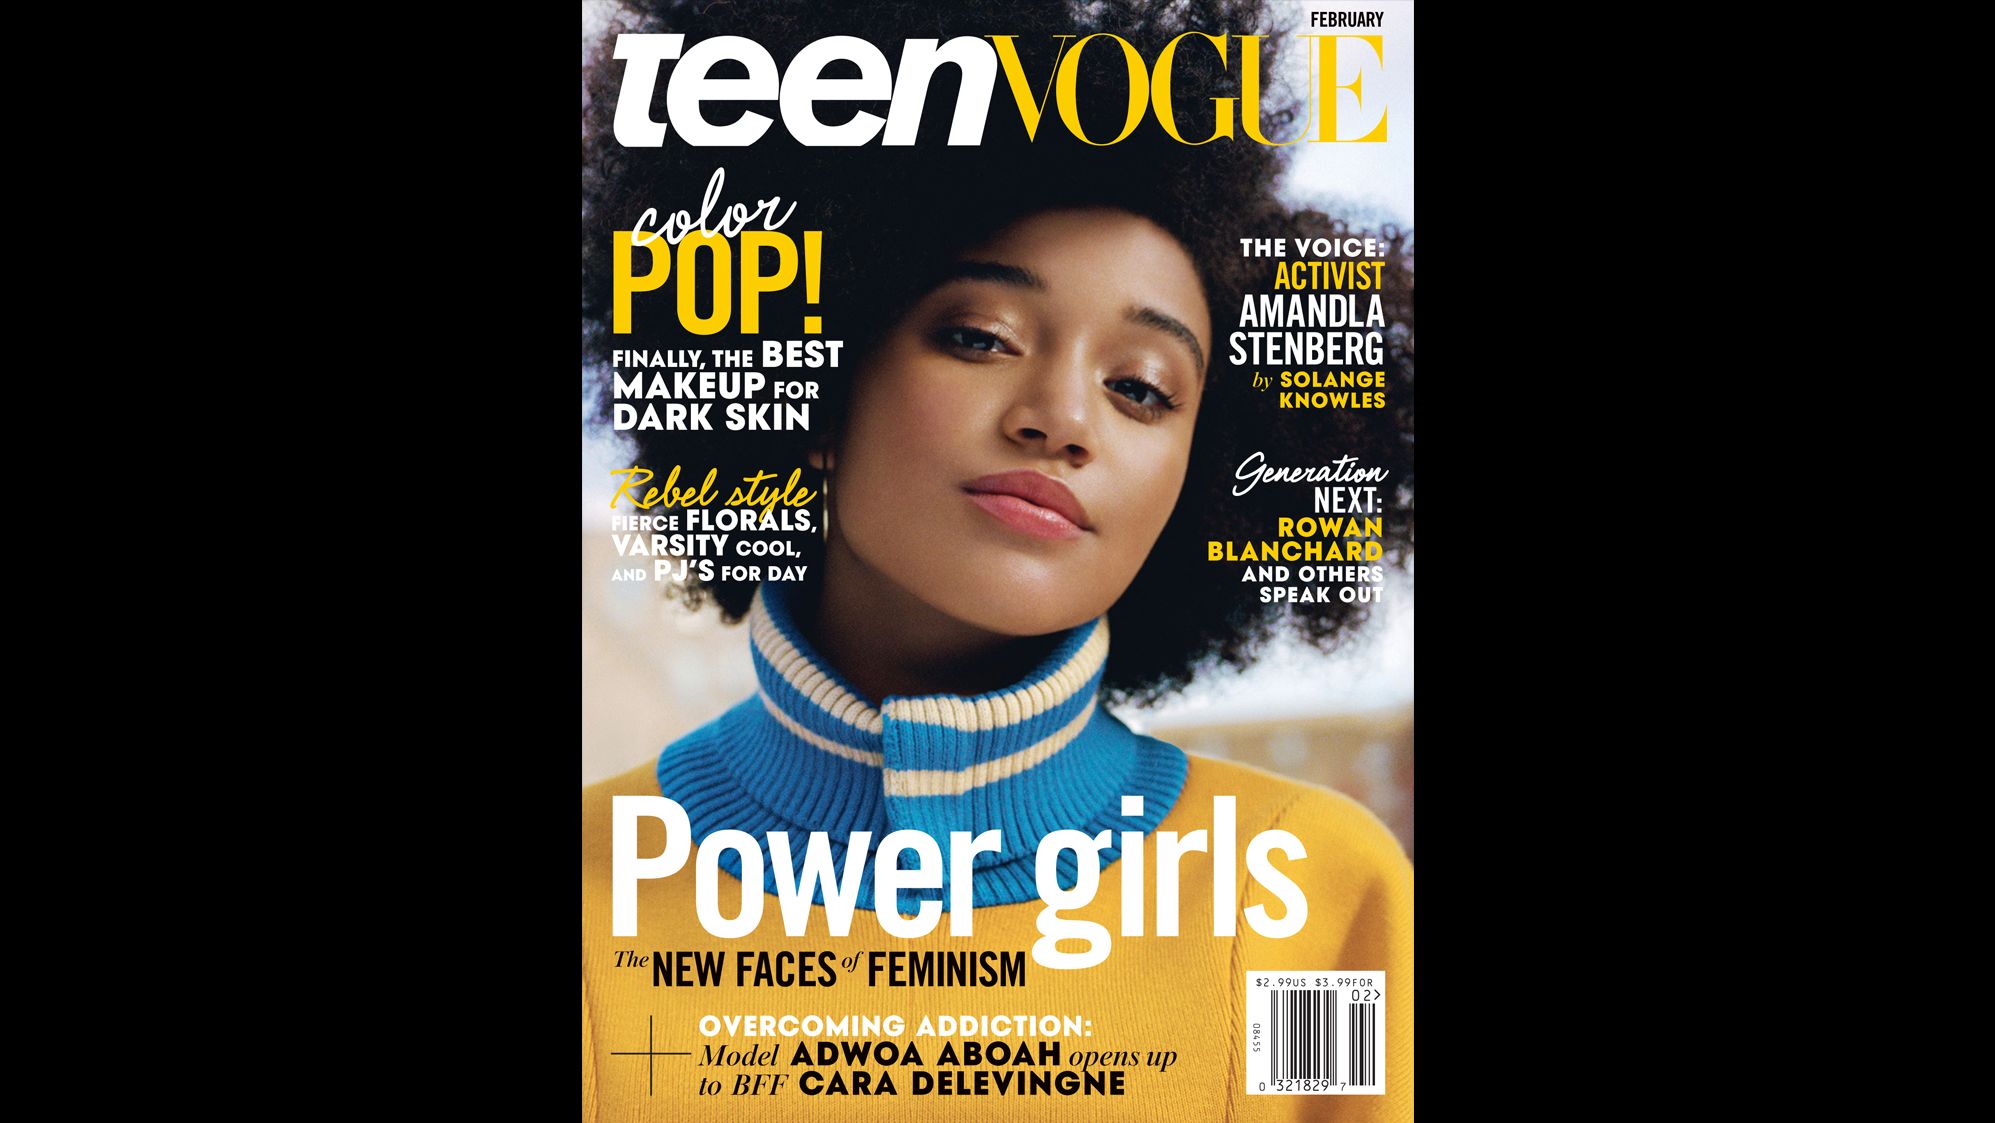 Teen Vogue's February cover features Amandla Stenberg. 